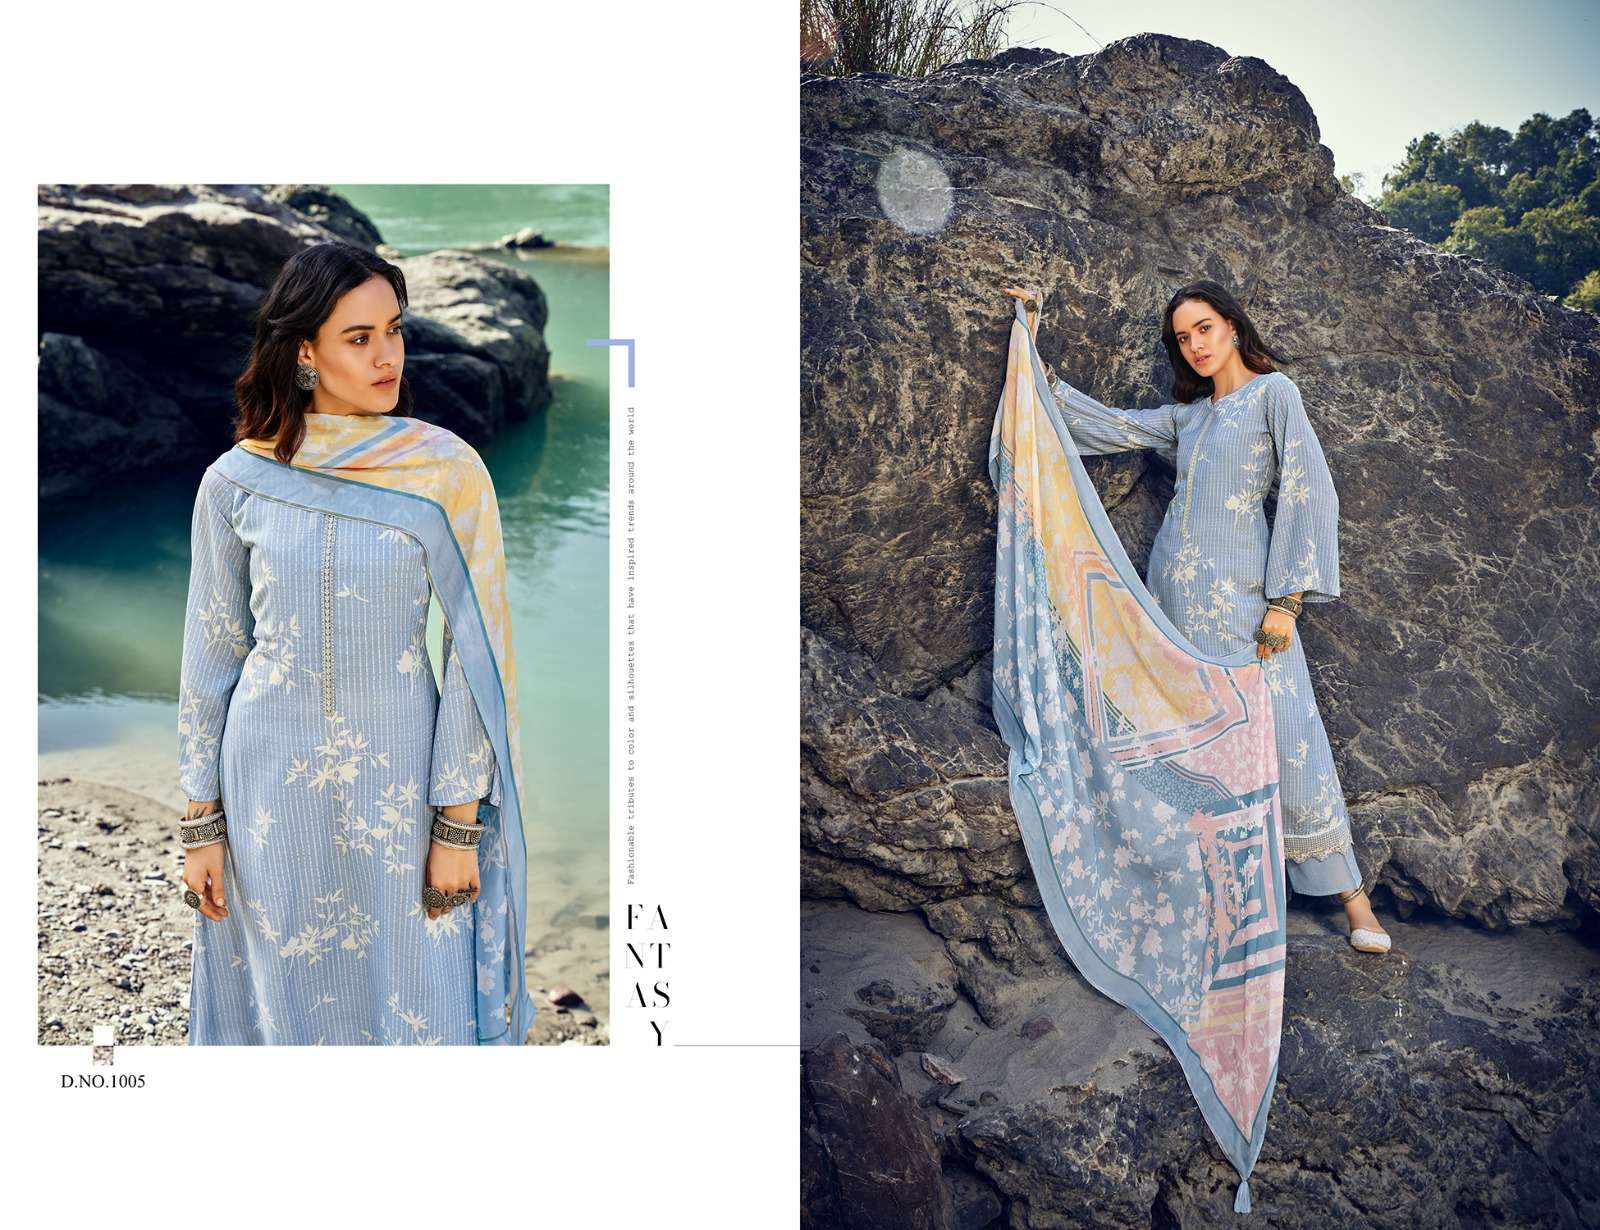 Summer Shine By Rang Fashion 1001 To 1006 Series Beautiful Suits Colorful Stylish Fancy Casual Wear & Ethnic Wear Pure Muslin Dresses At Wholesale Price